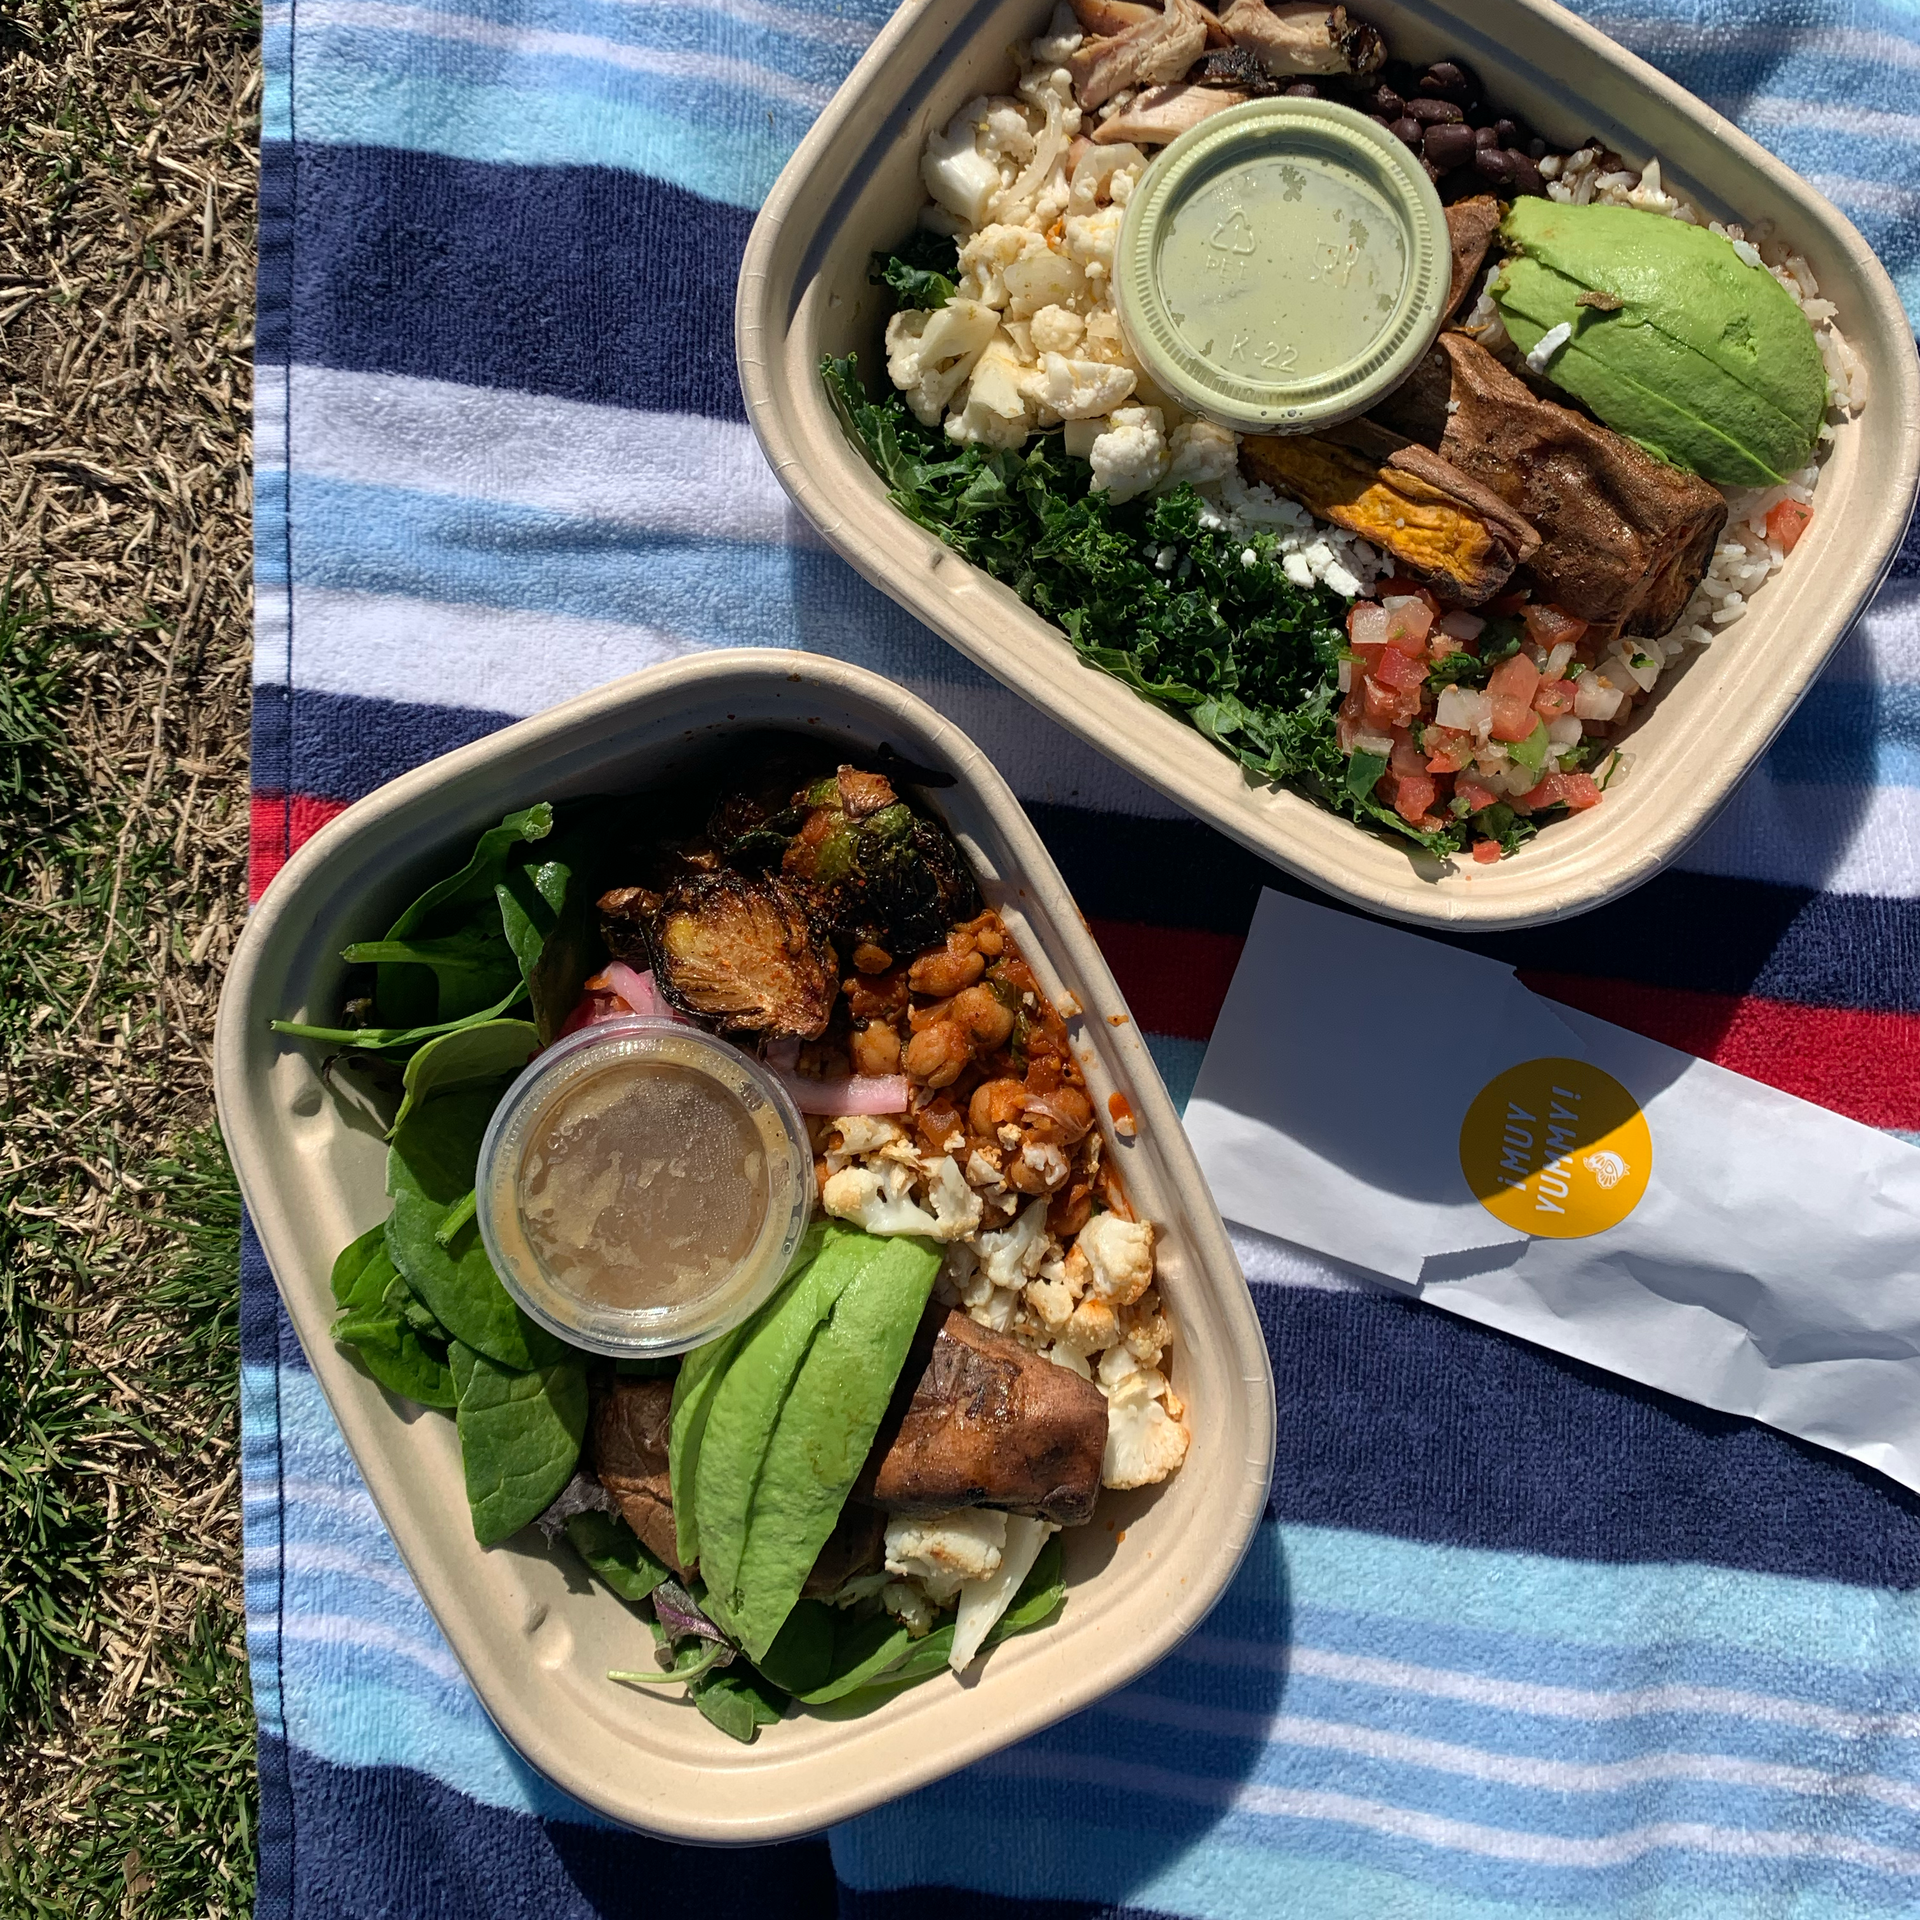 Two to-go containers on a picnic blanket